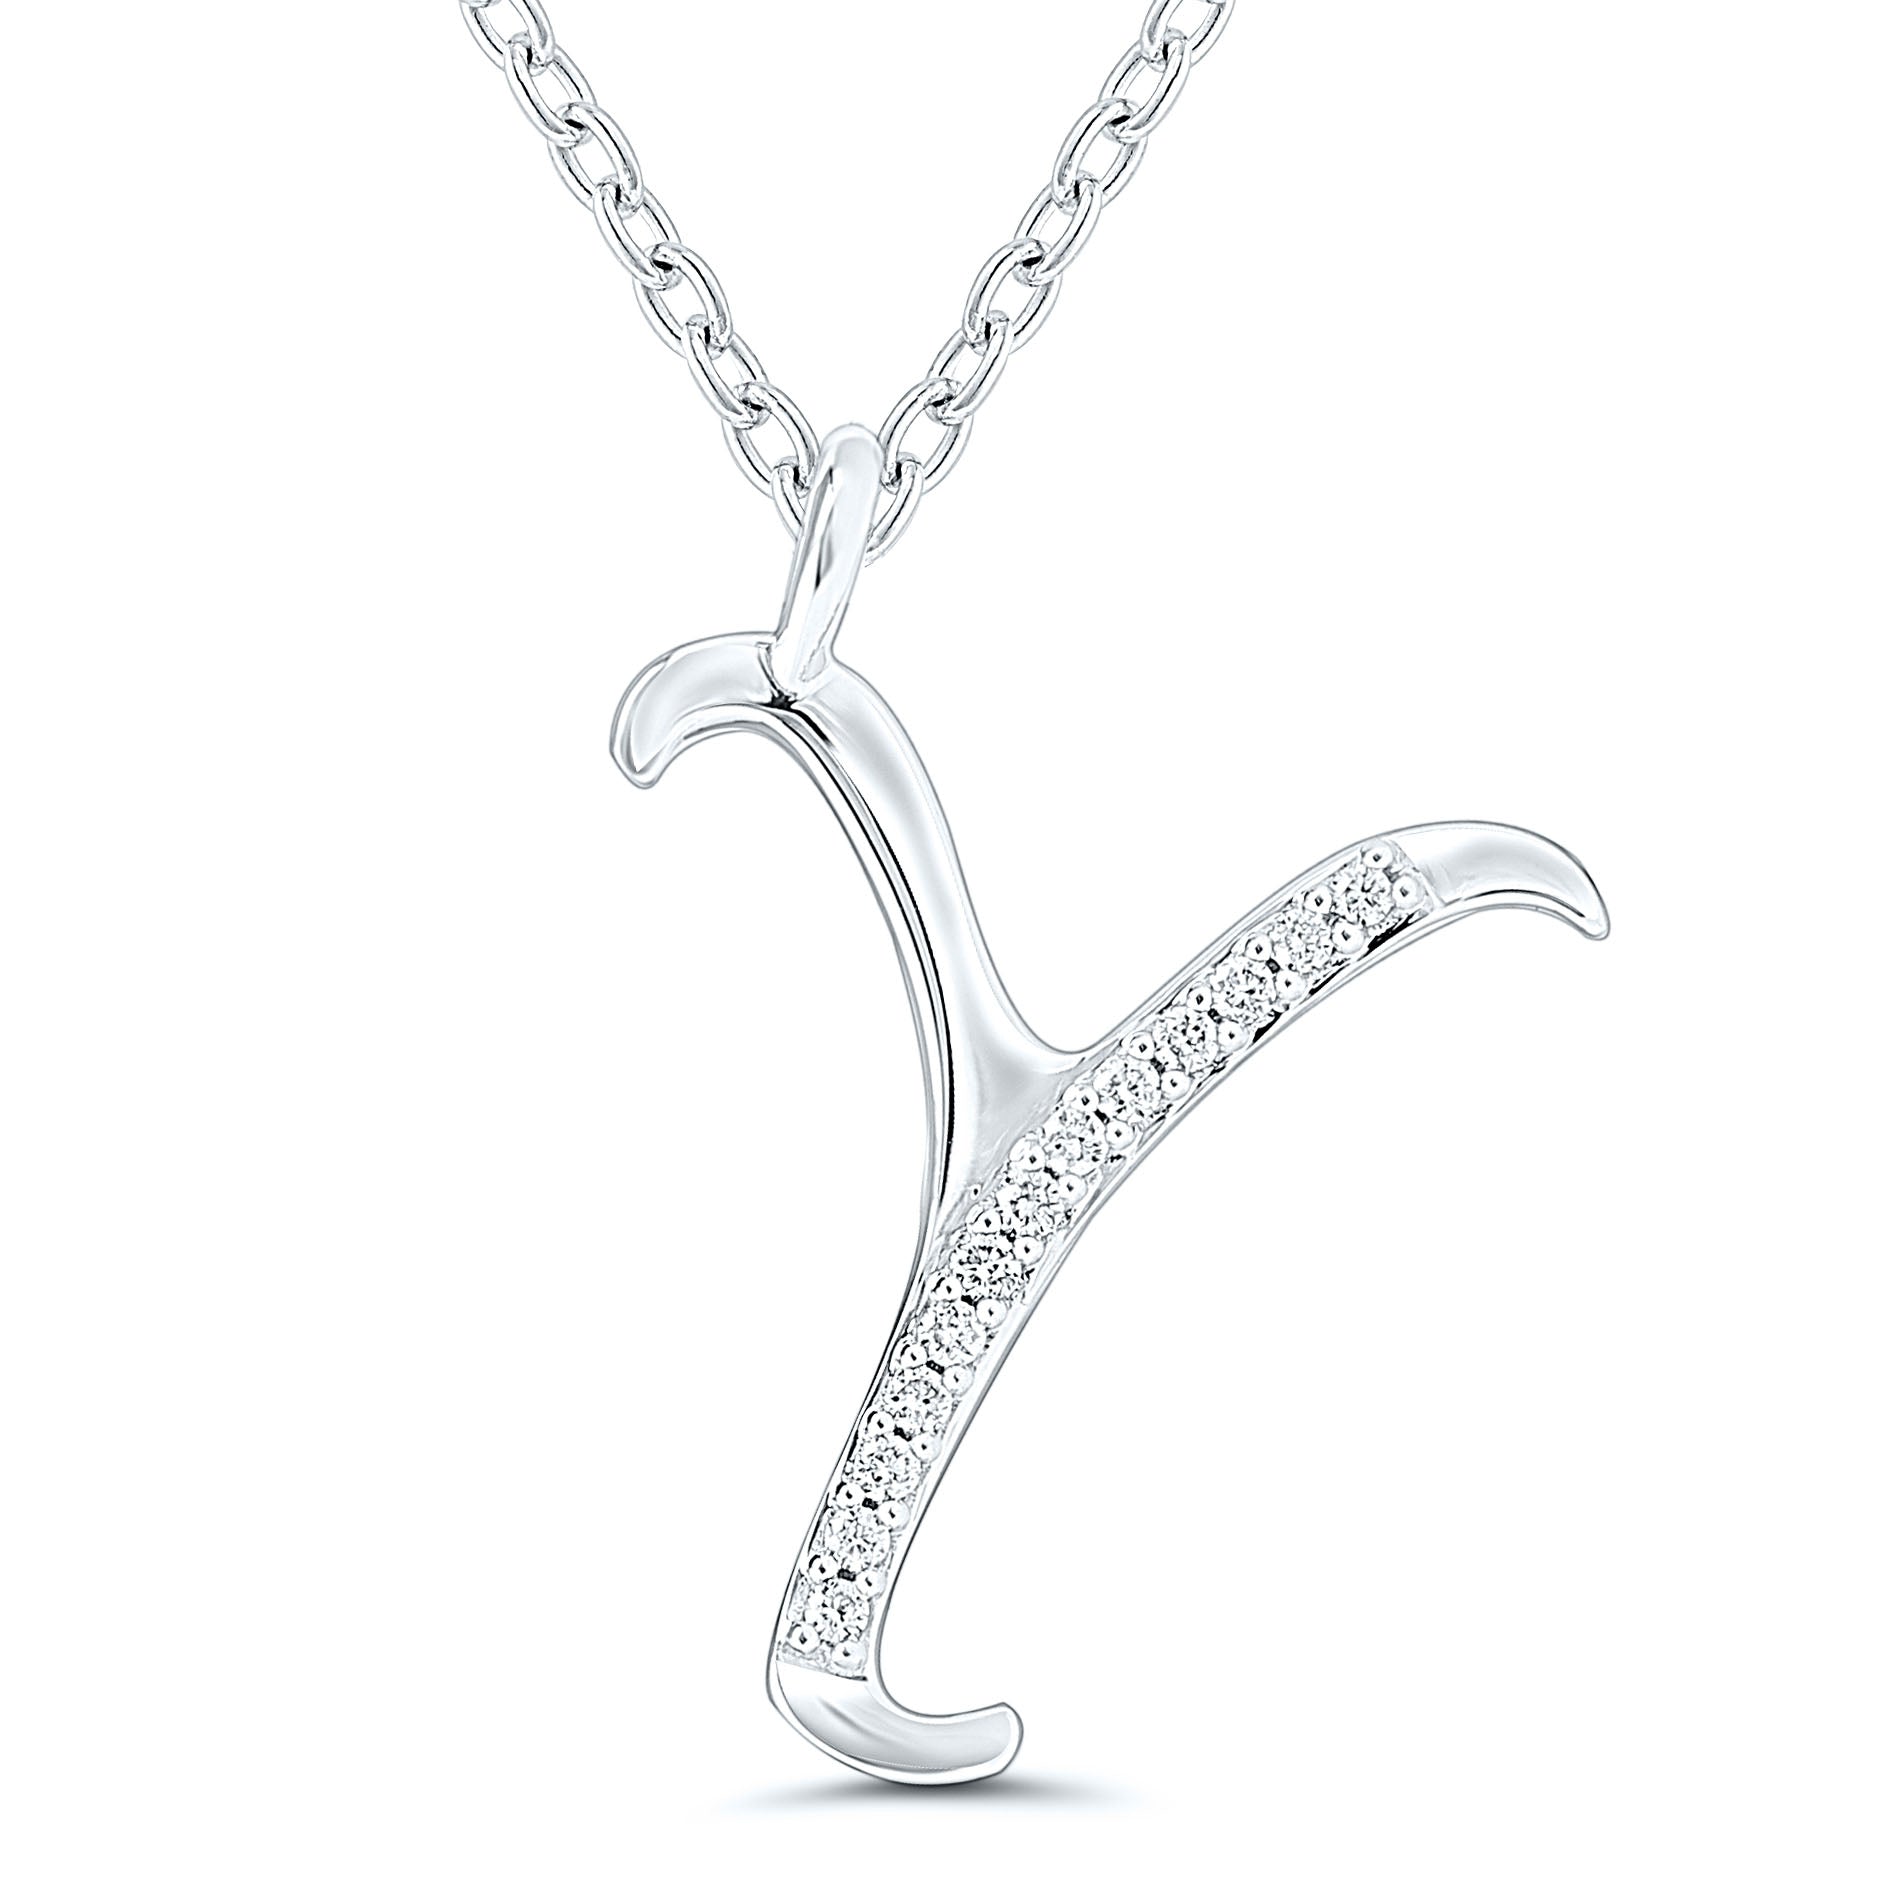 Diamond Initial Pendant - 9ct White Gold - Hallmark Jewellers Formby & The Jewellers Bench Widnes